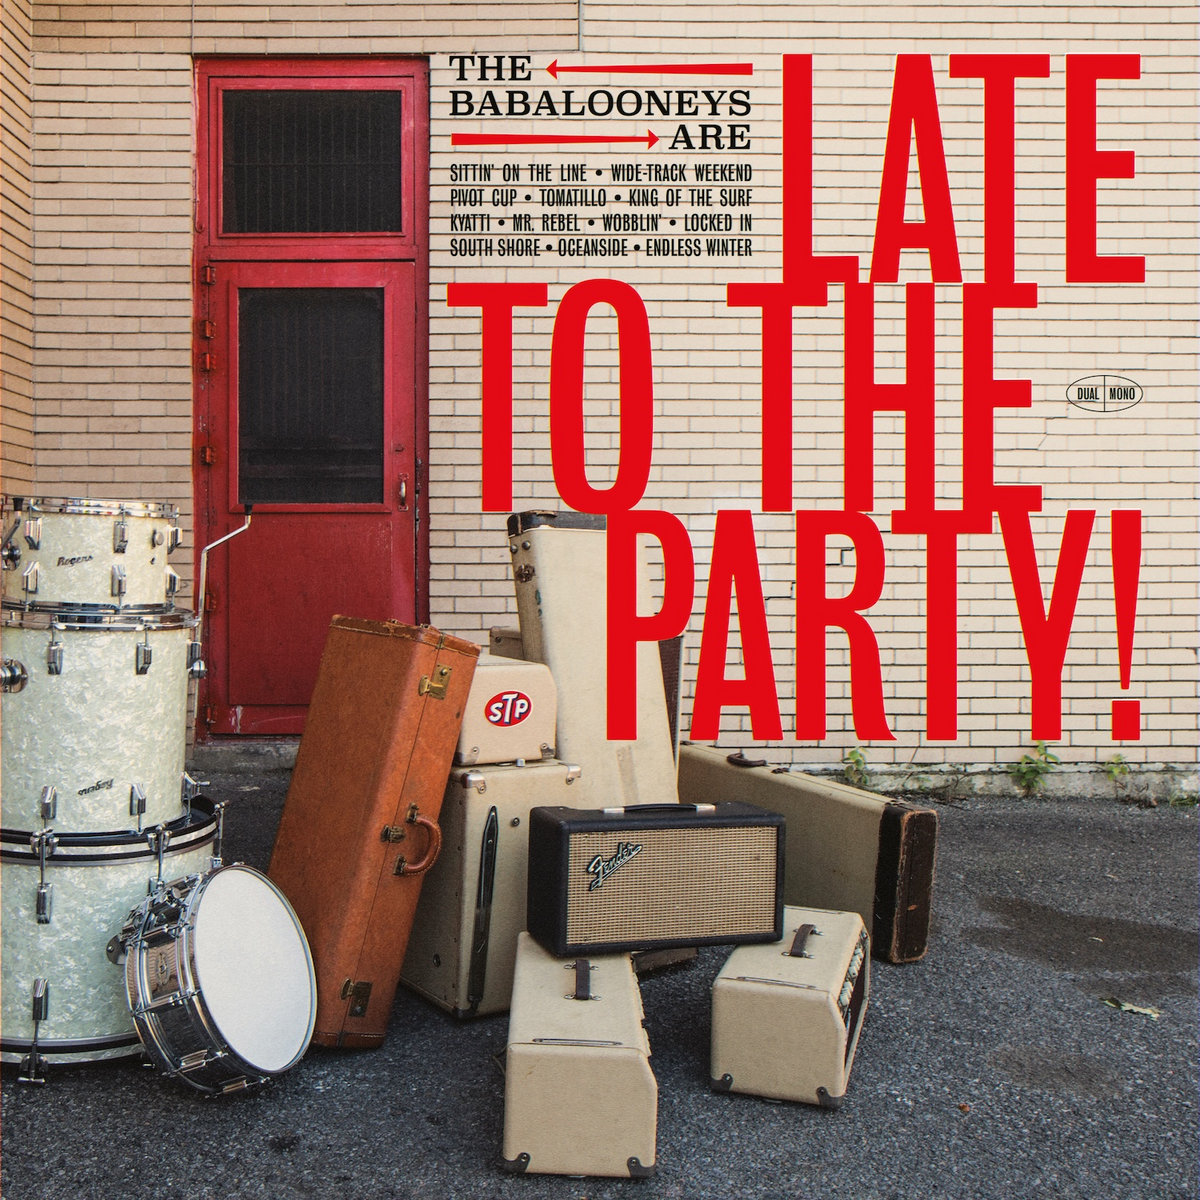 The Babalooneys – Late to the Party!